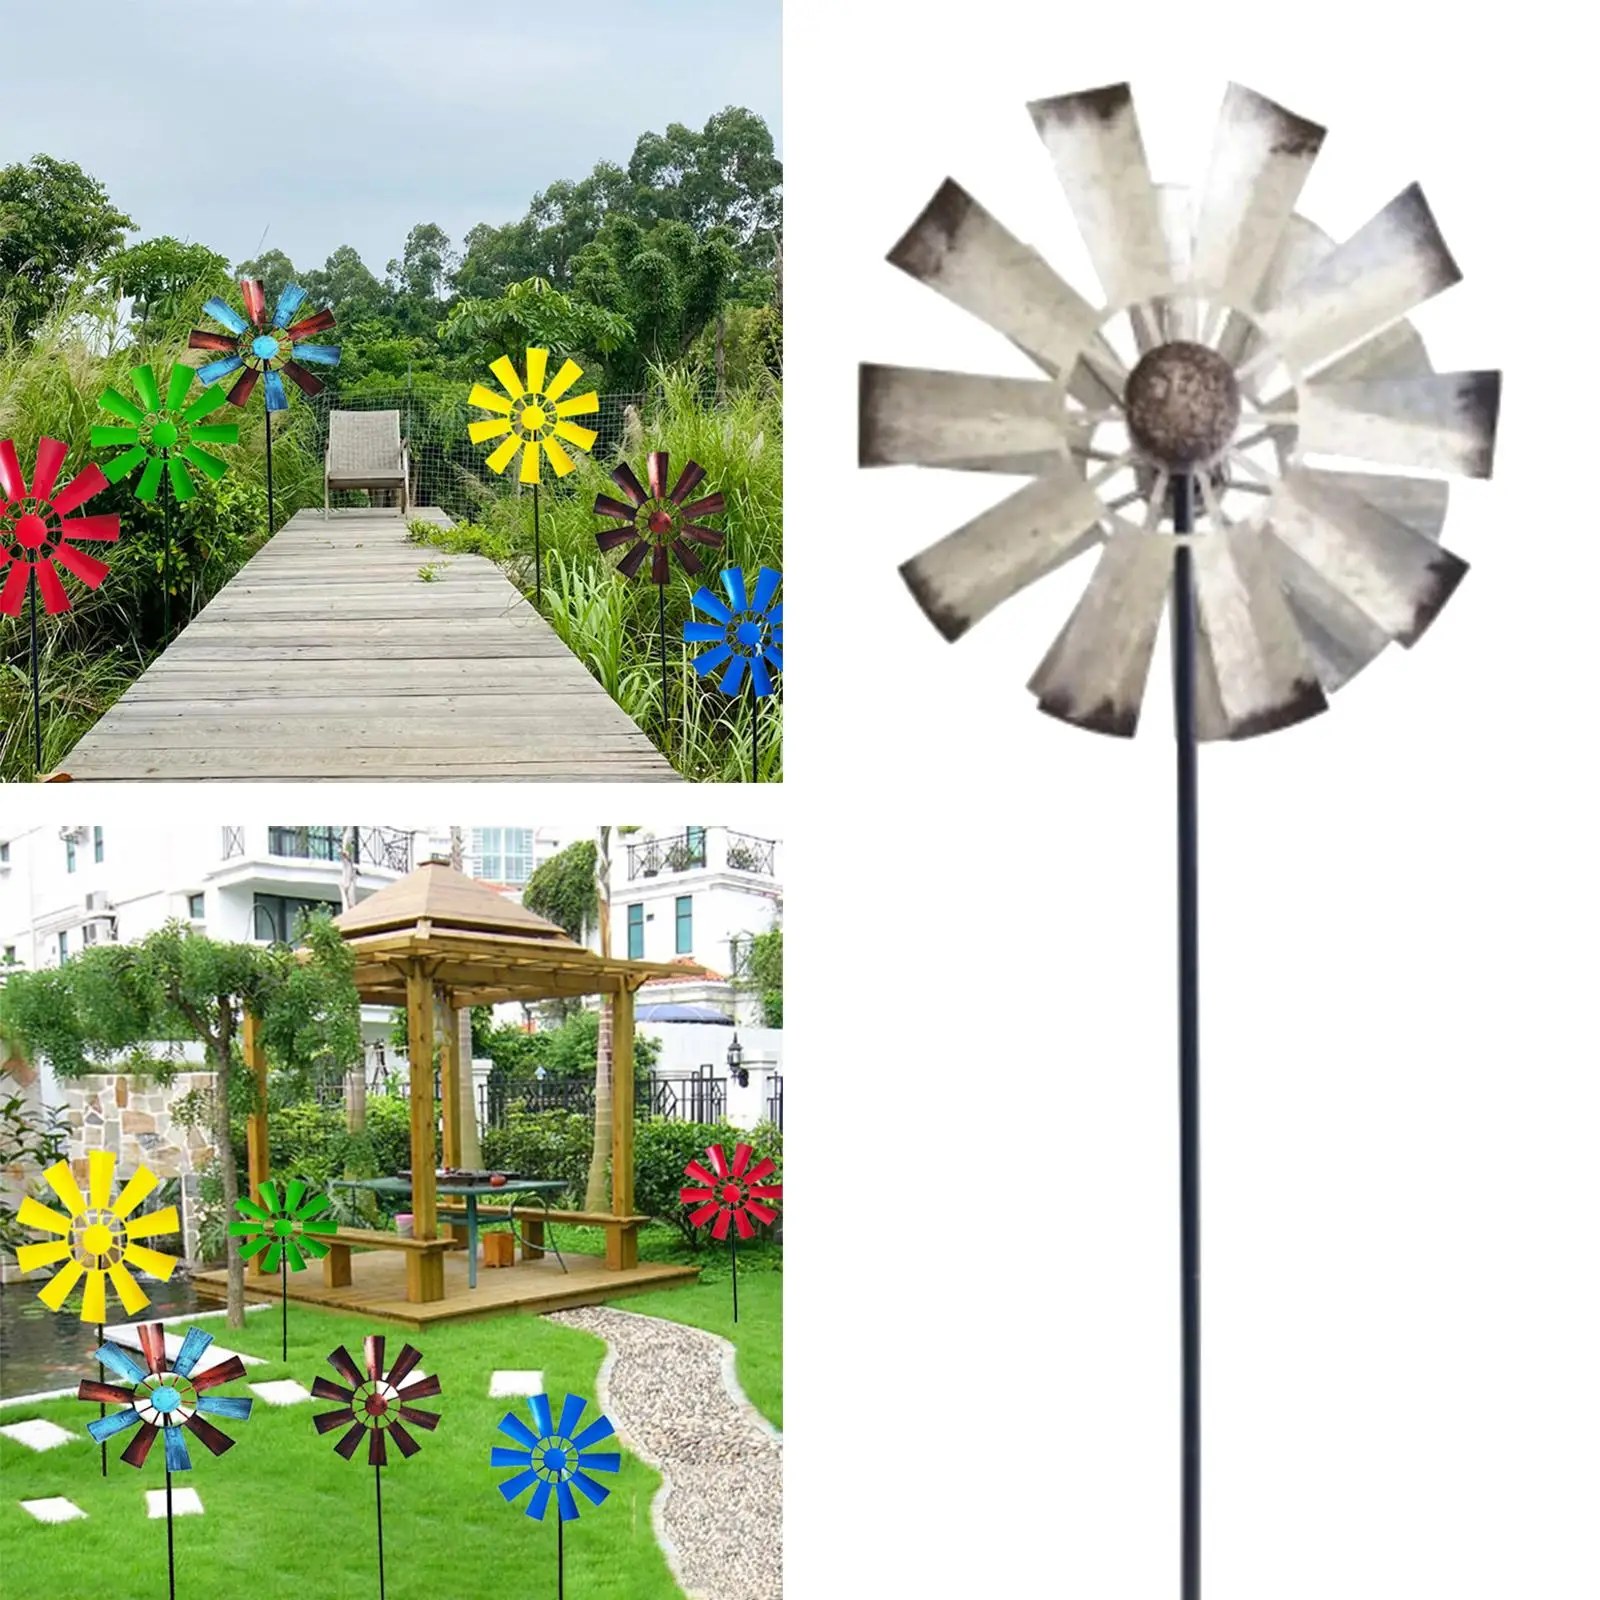 28in Windmill Metal Decorative Rustic Ground Plug Rotating Weather Vane Ornament for Garden Lawn Terrace Backyard Courtyard